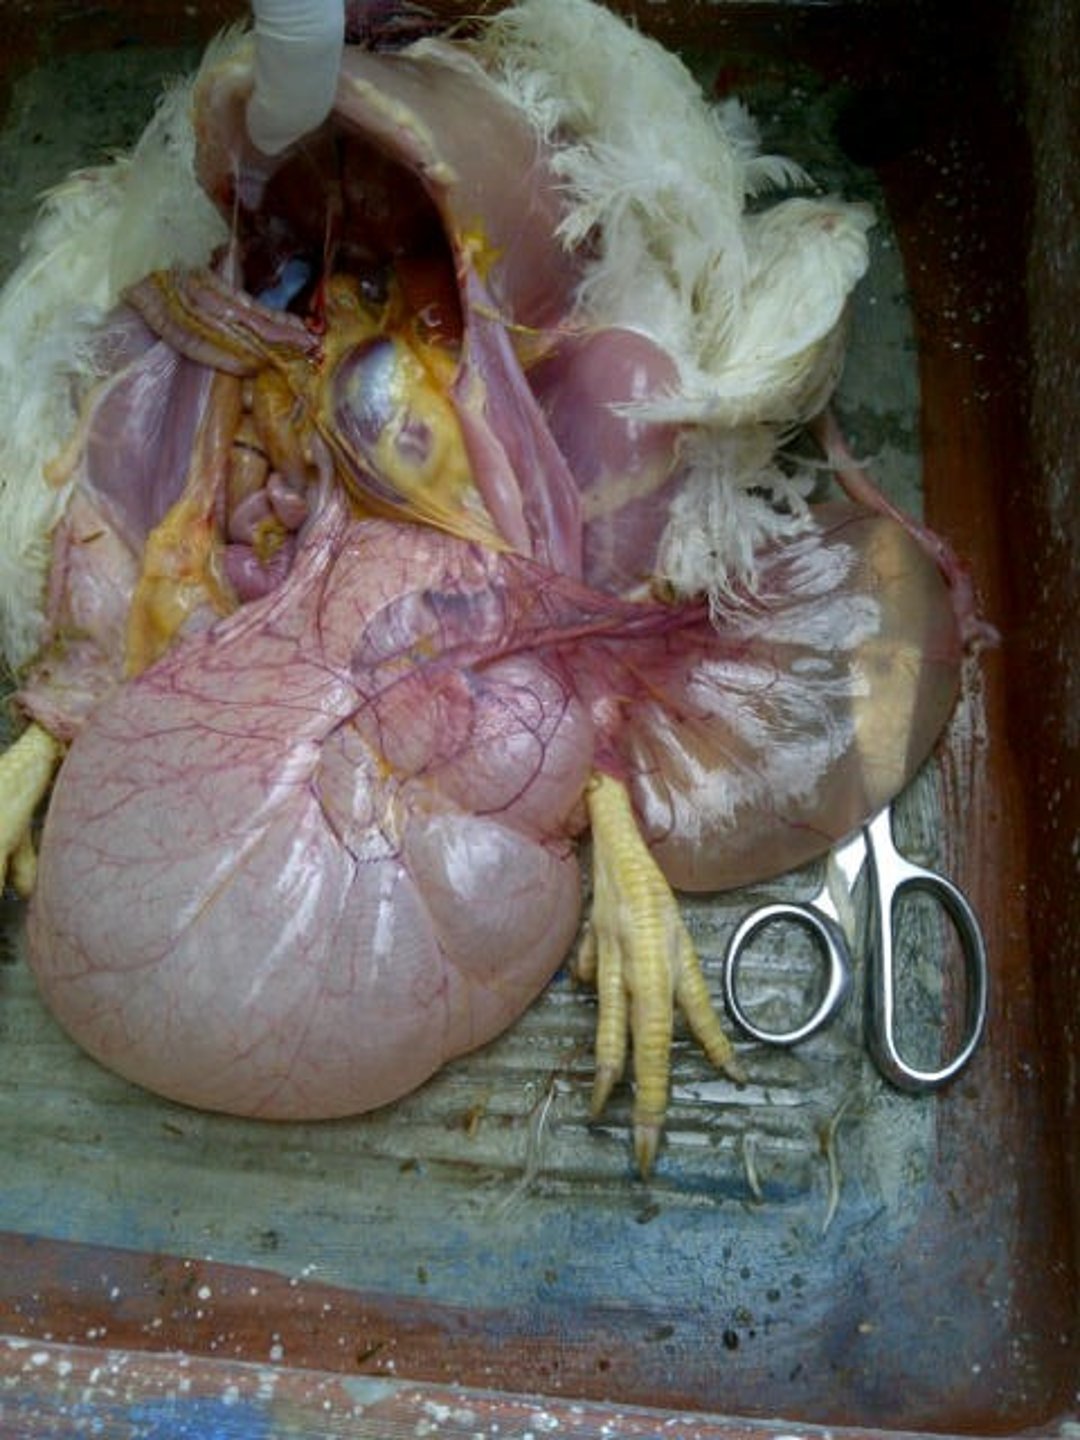 Cystic oviduct, chicken